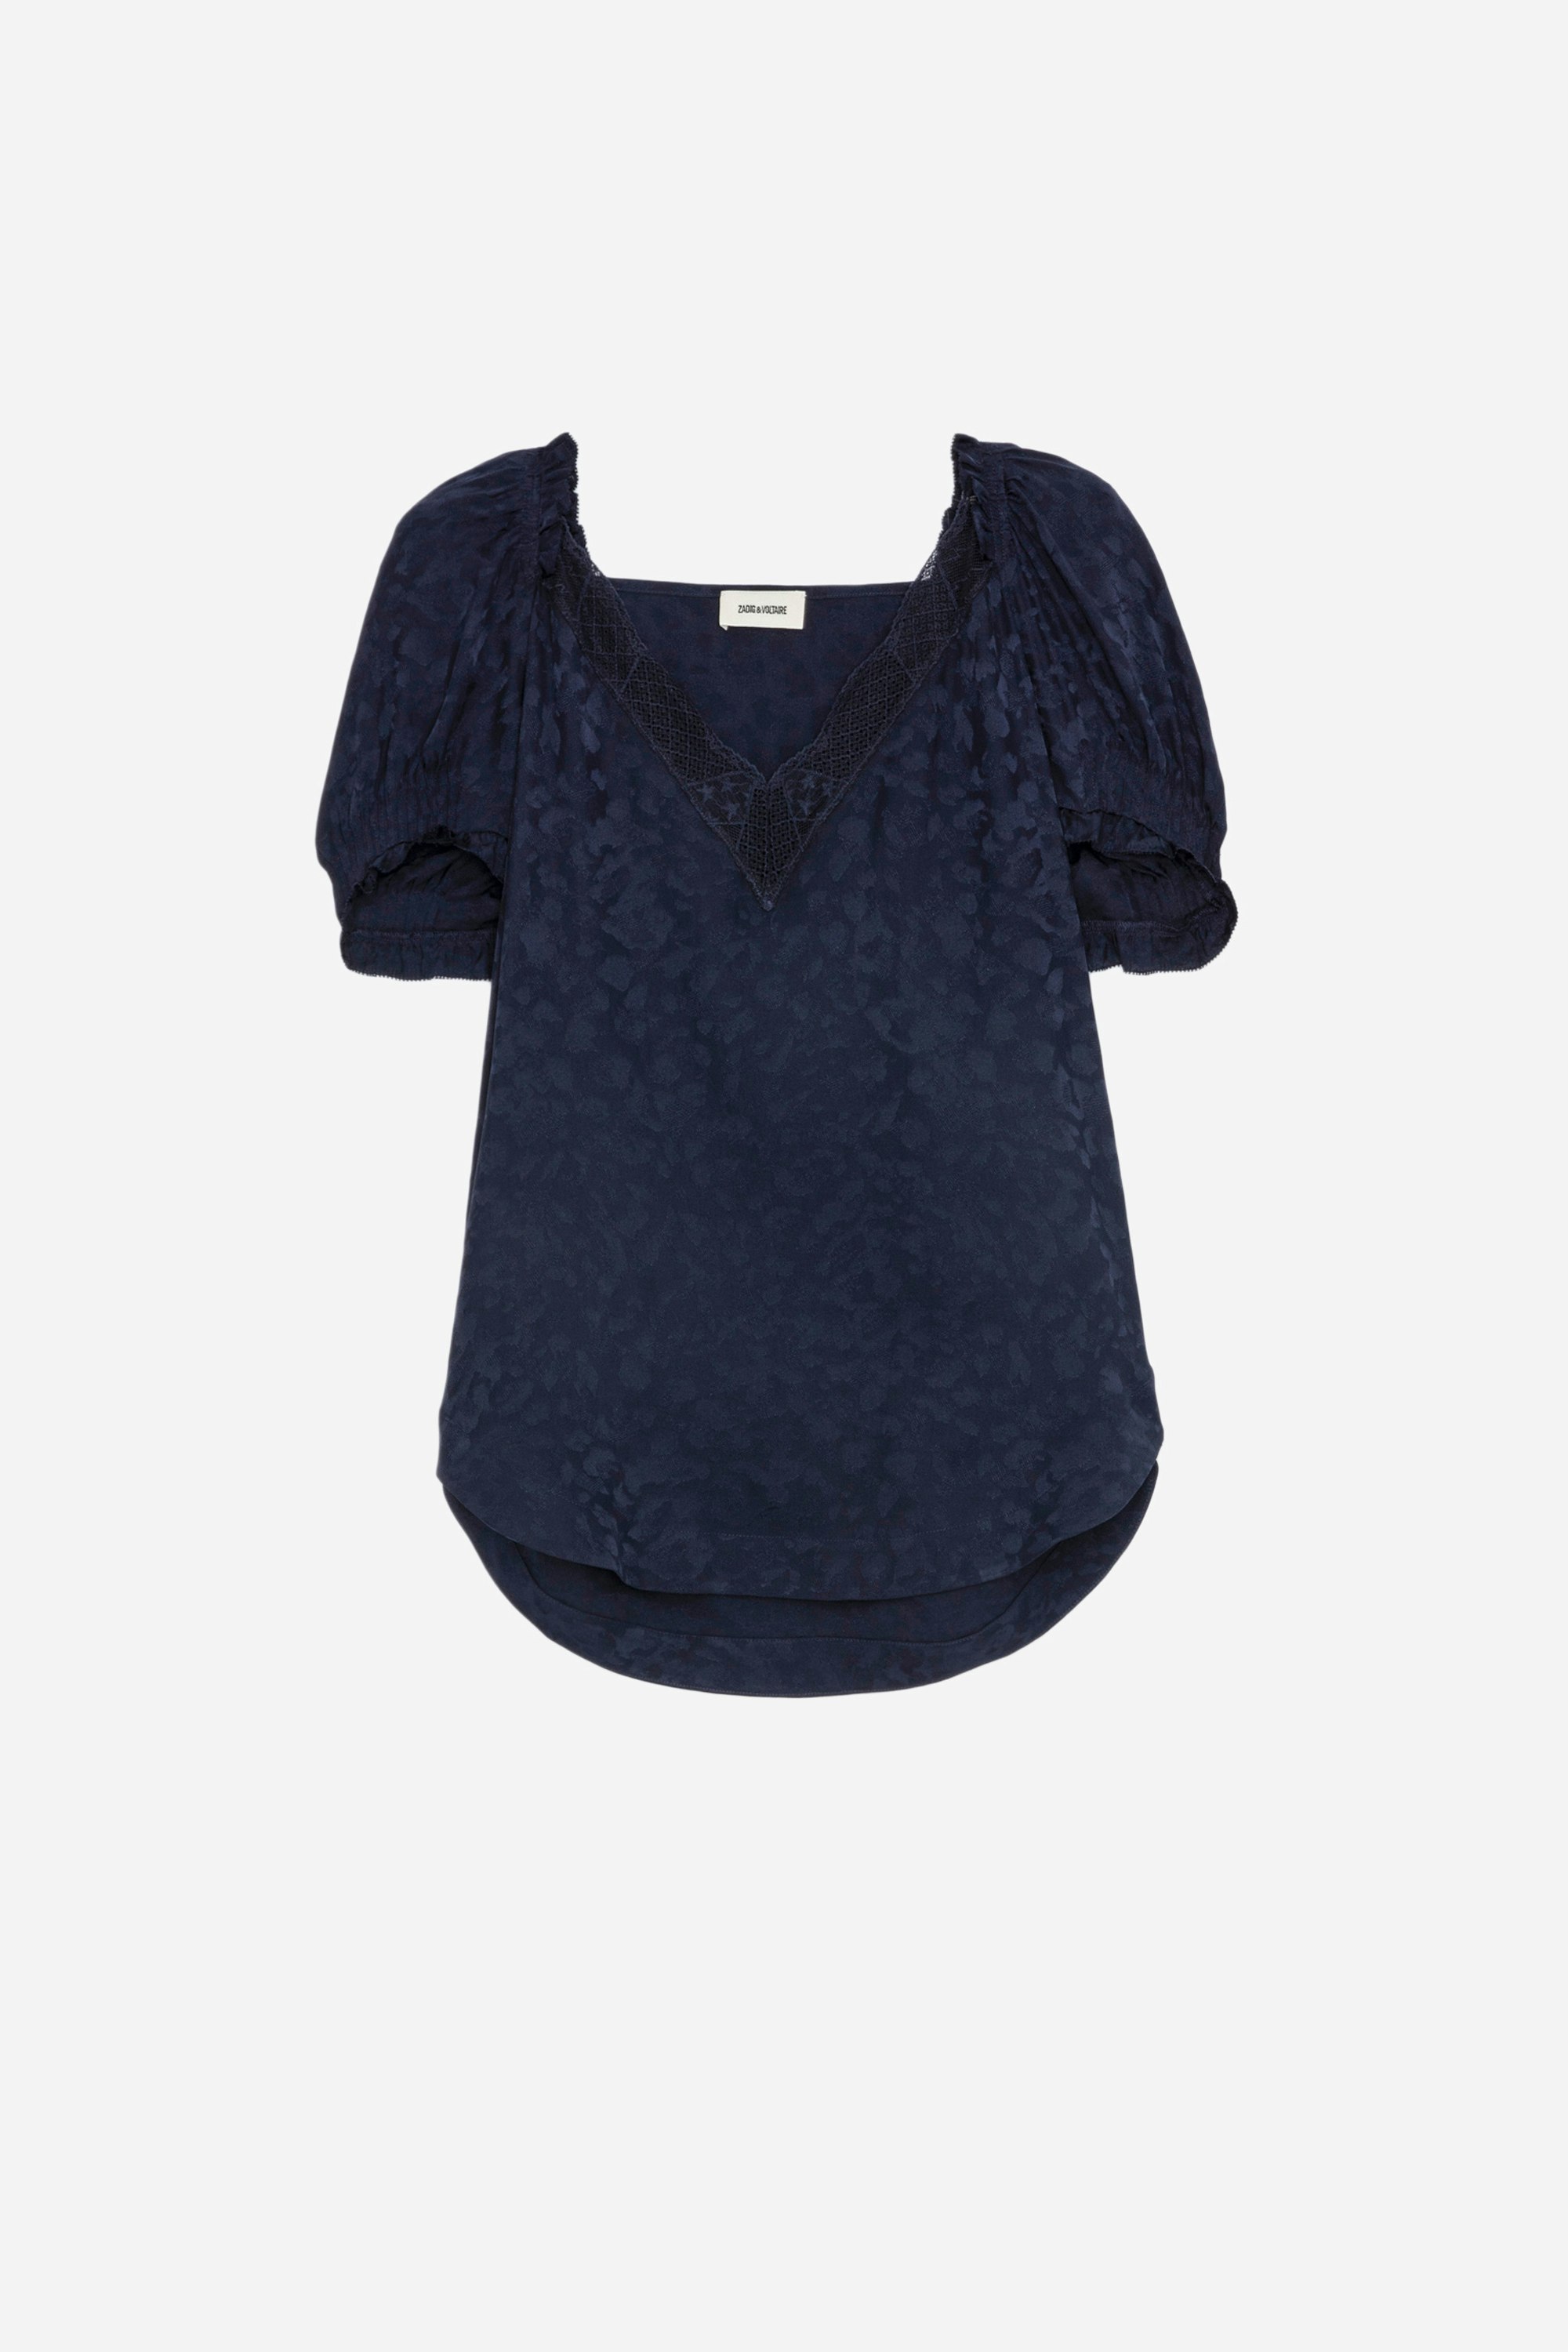 Tasty Leopard Jacquard Shirt - Women's navy silk top featuring leopard jacquard and ruffled short sleeves.